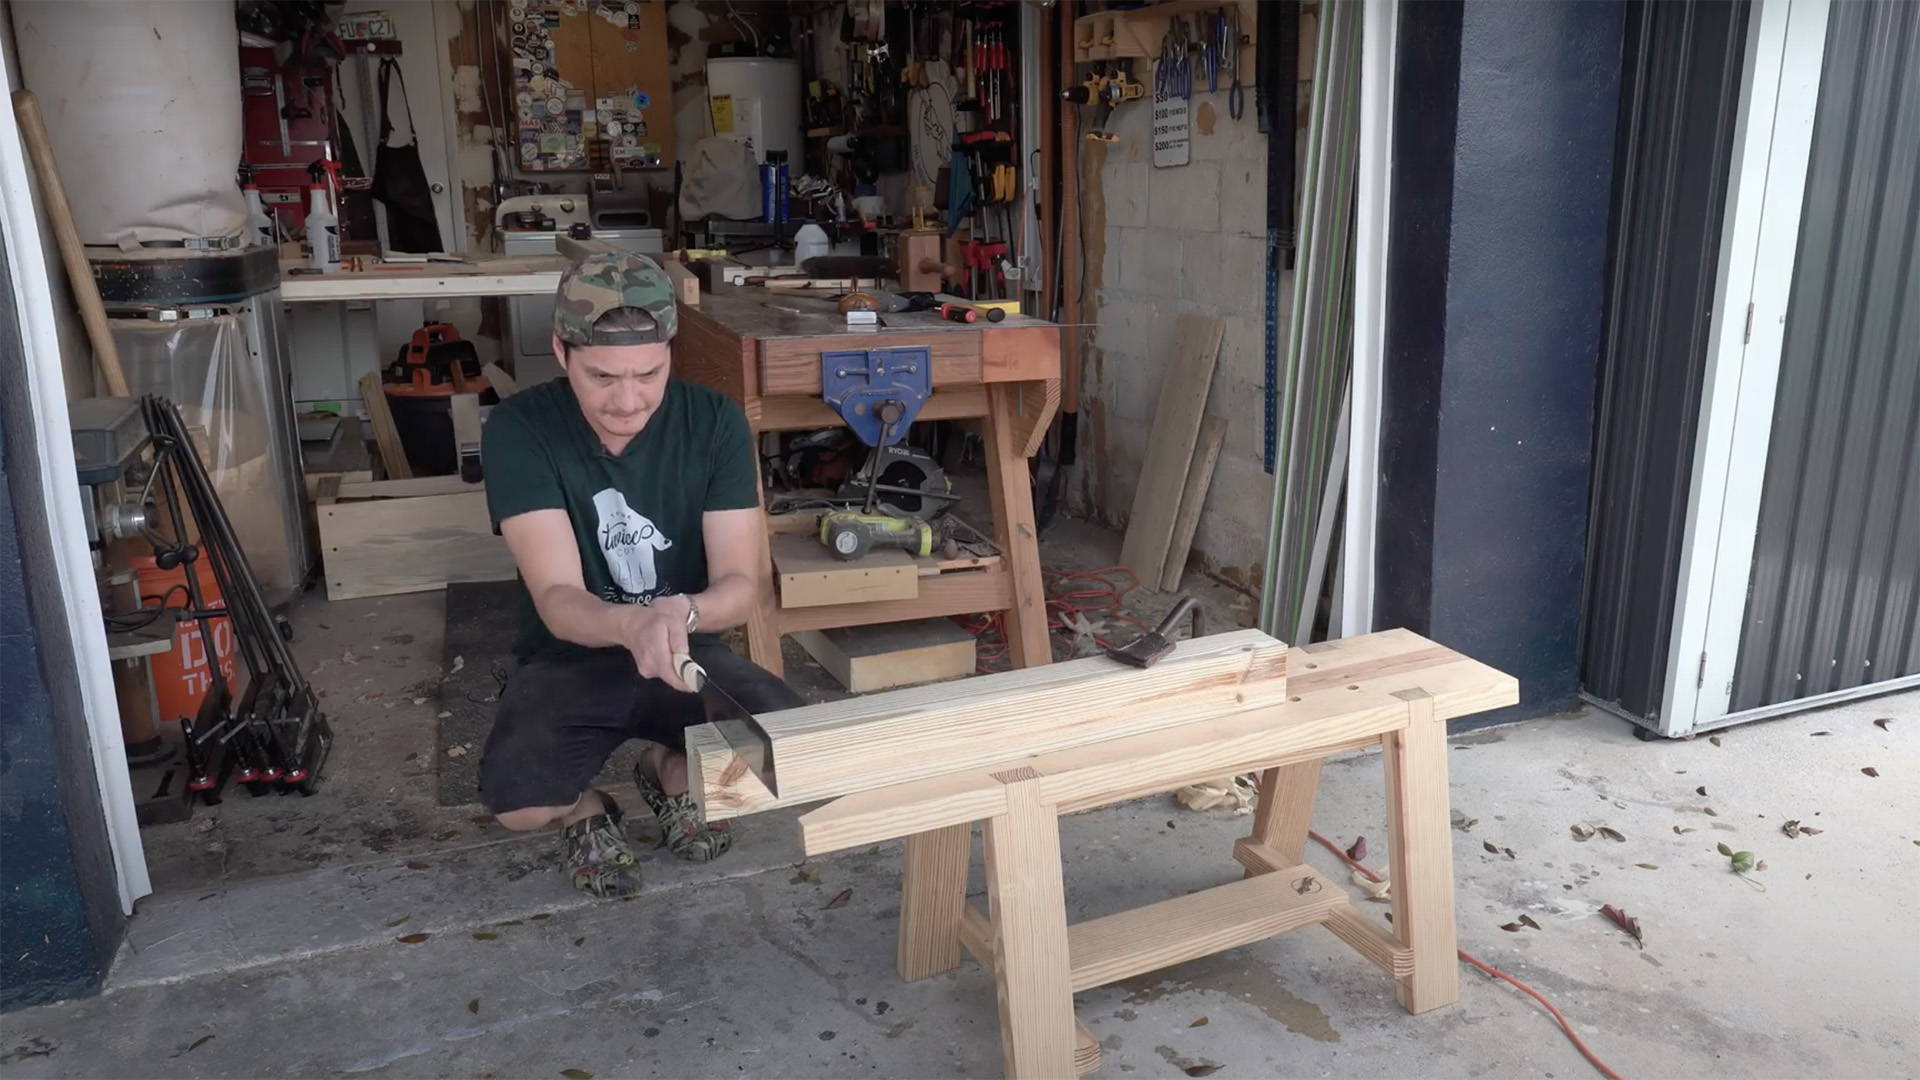 Stories from the Katz-Moses Woodworkers with Disabilities Fund: A Message from the Director